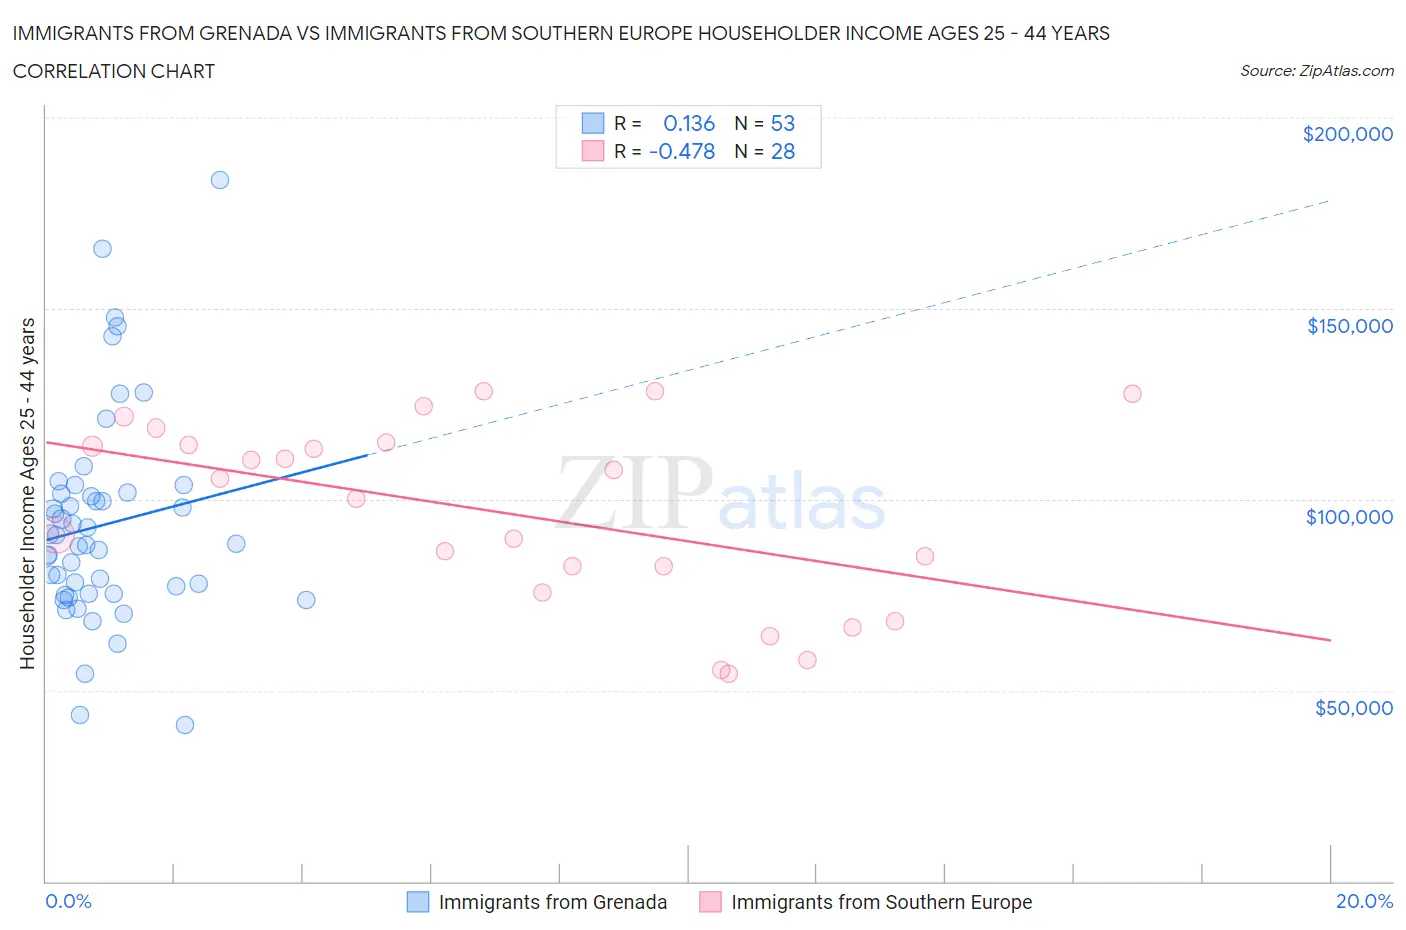 Immigrants from Grenada vs Immigrants from Southern Europe Householder Income Ages 25 - 44 years